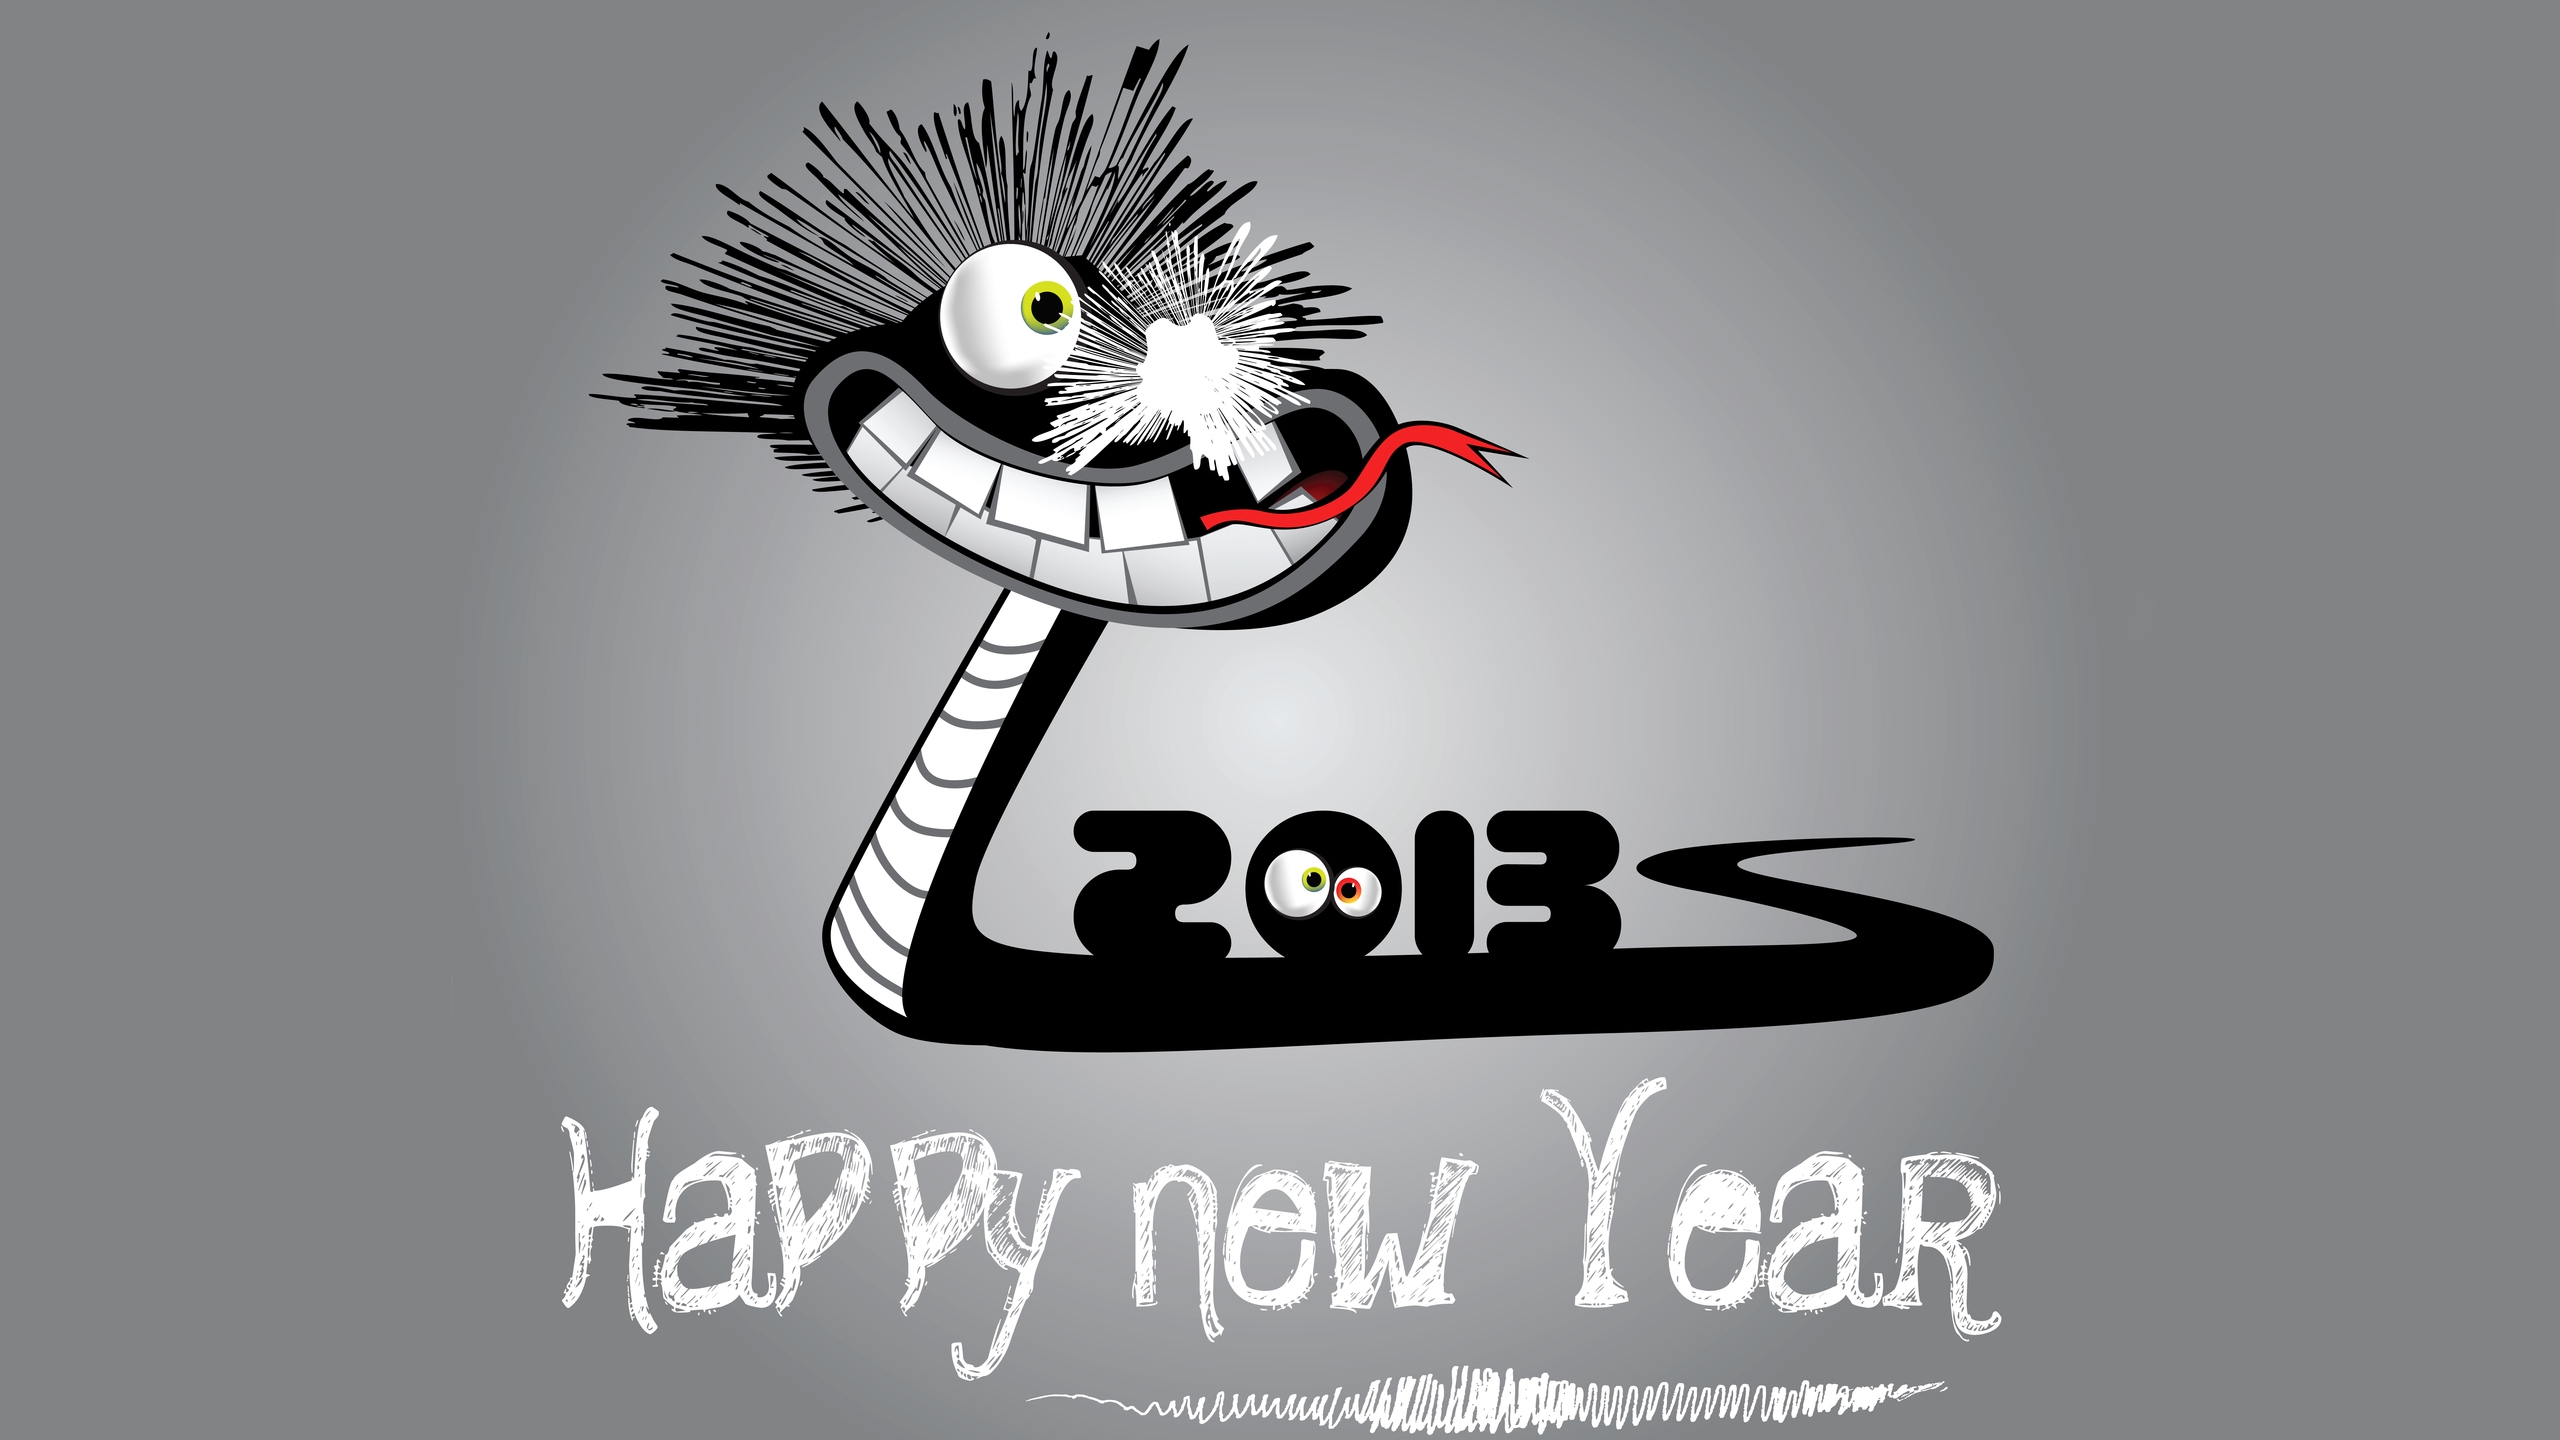 2013 Happy New Year for 2560x1440 HDTV resolution